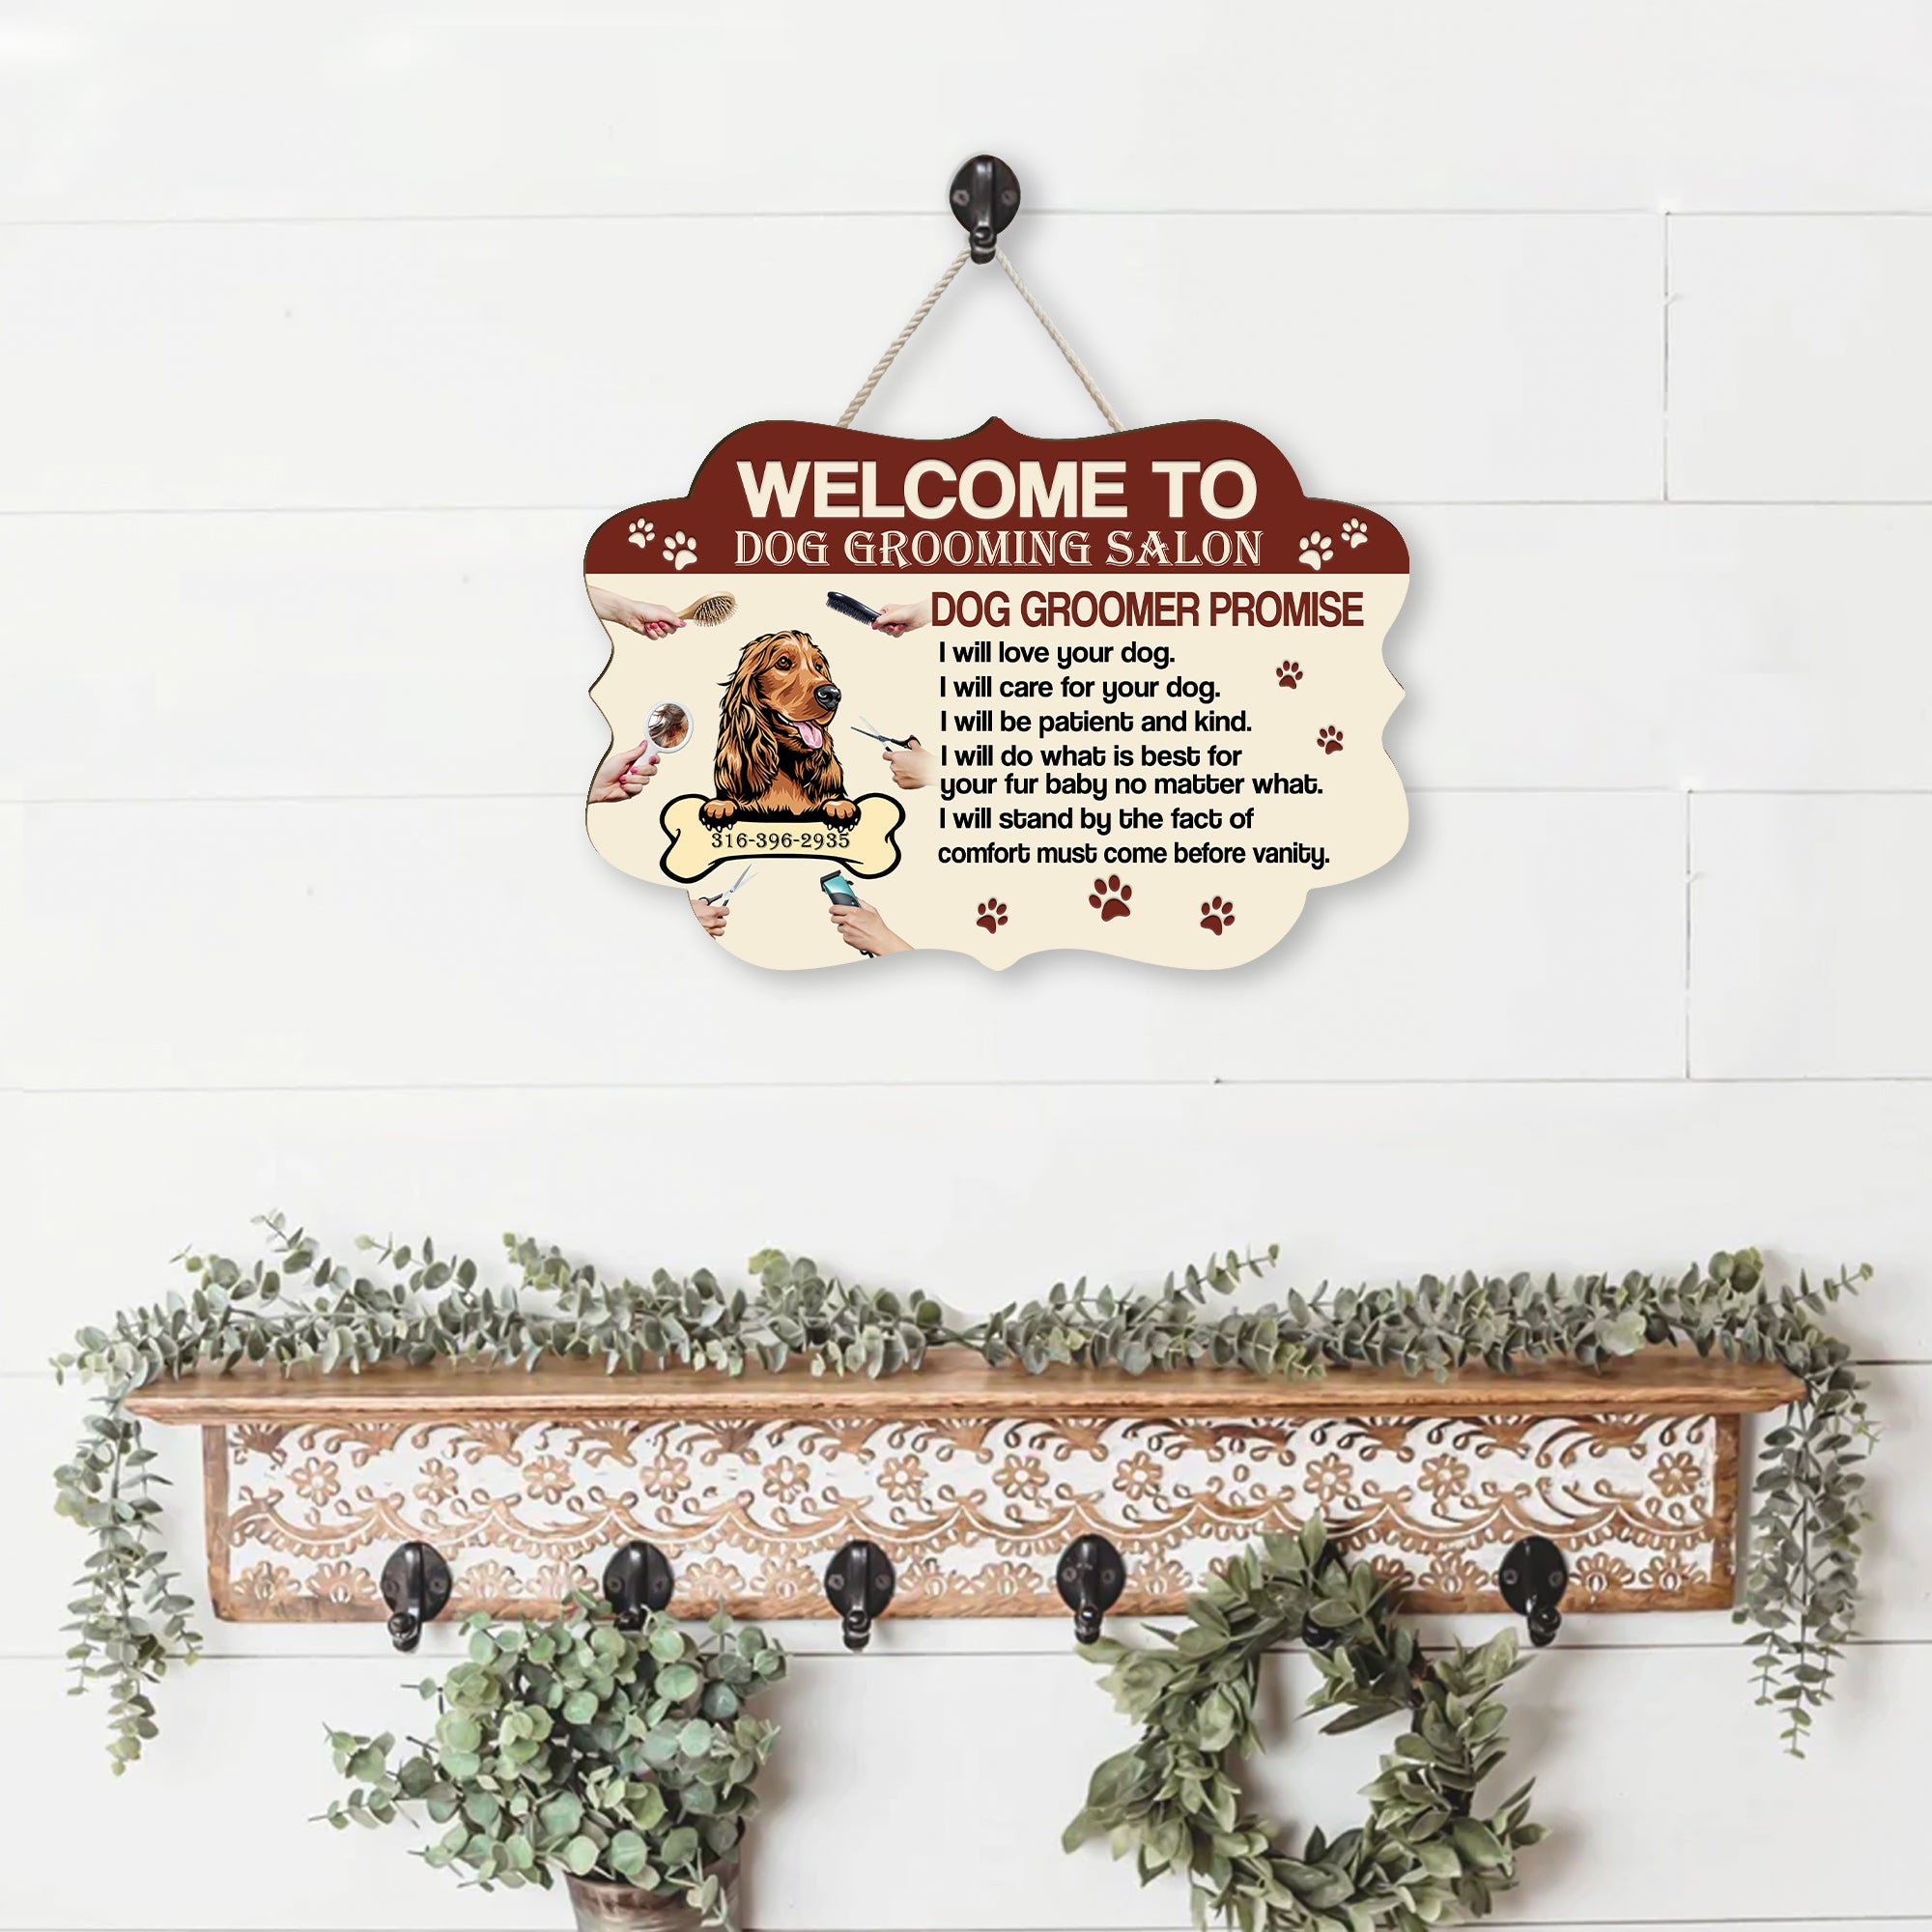 CUSTOM SHAPED WOODEN SIGN – WELCOME TO DOG GROOMING SALON WOODEN SIGN